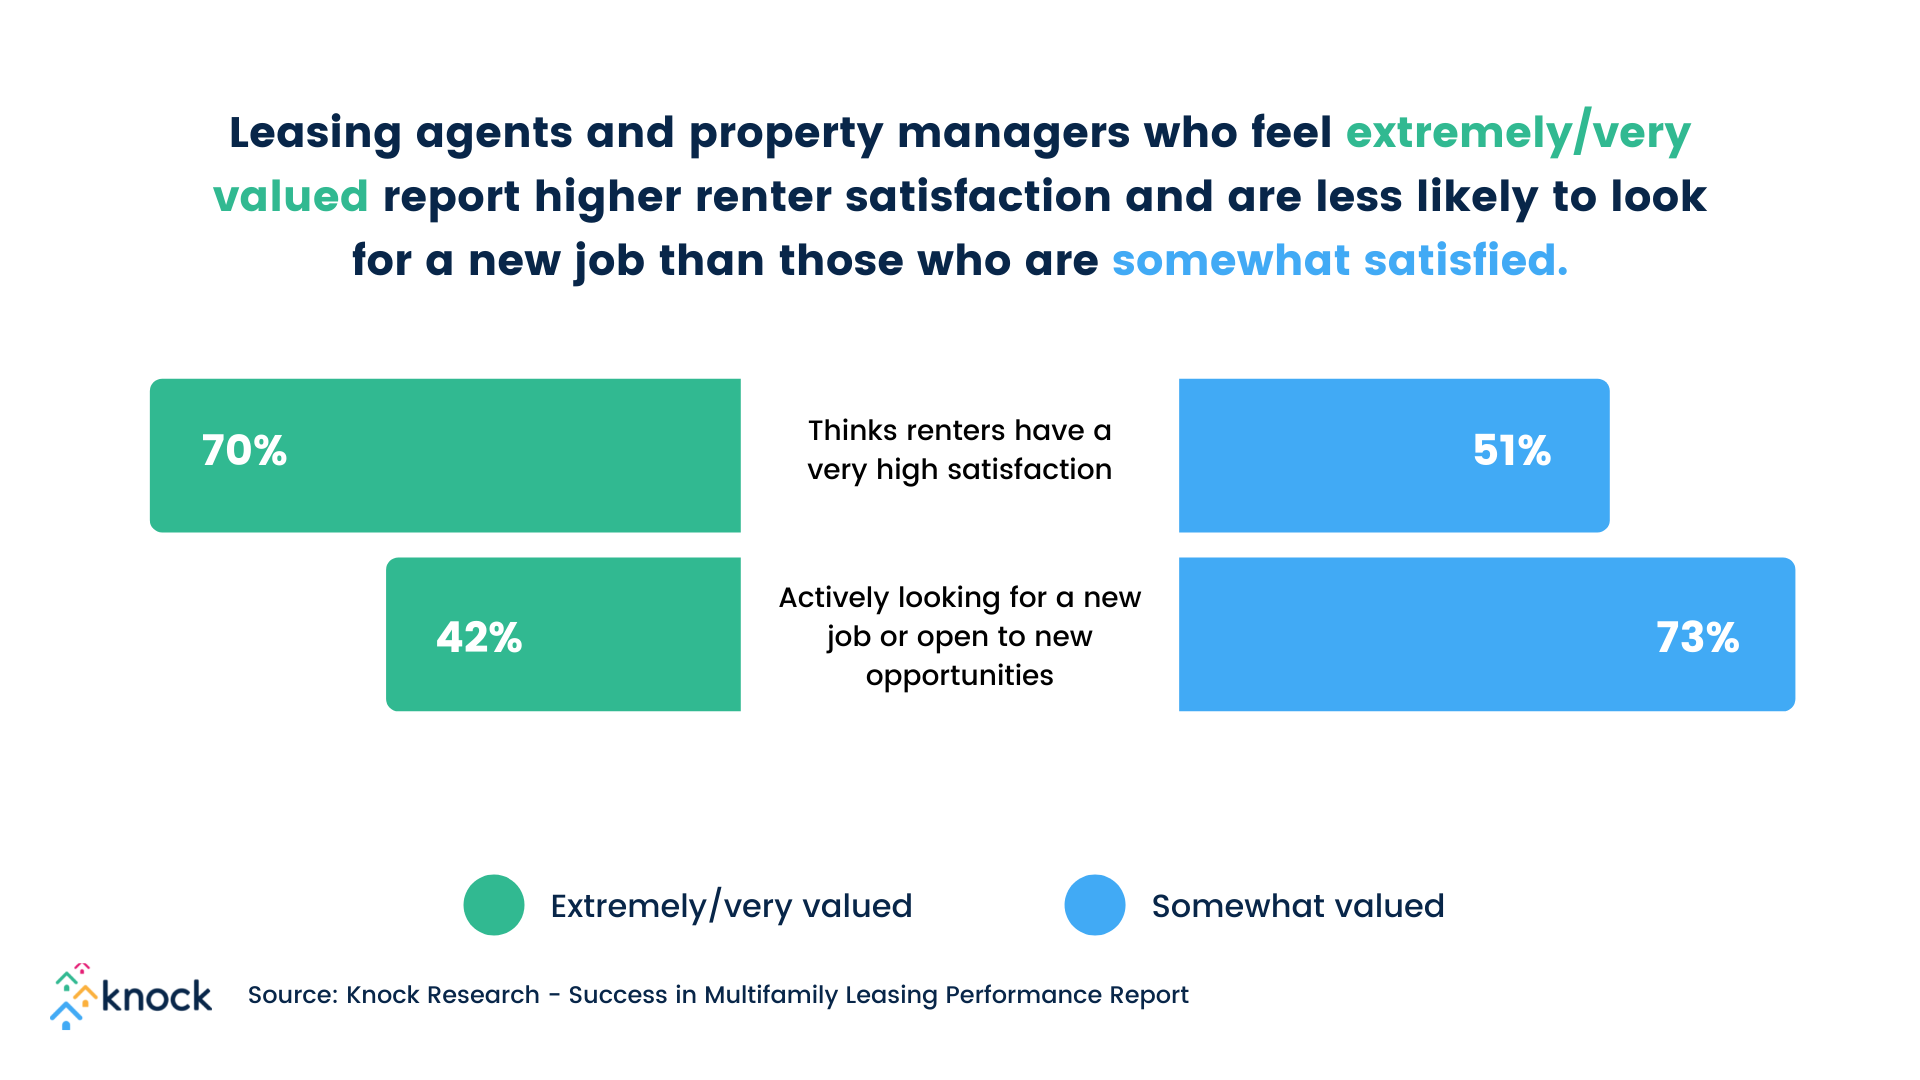 Knock's report shows: teams who feel extremely valued report higher renter satisfaction